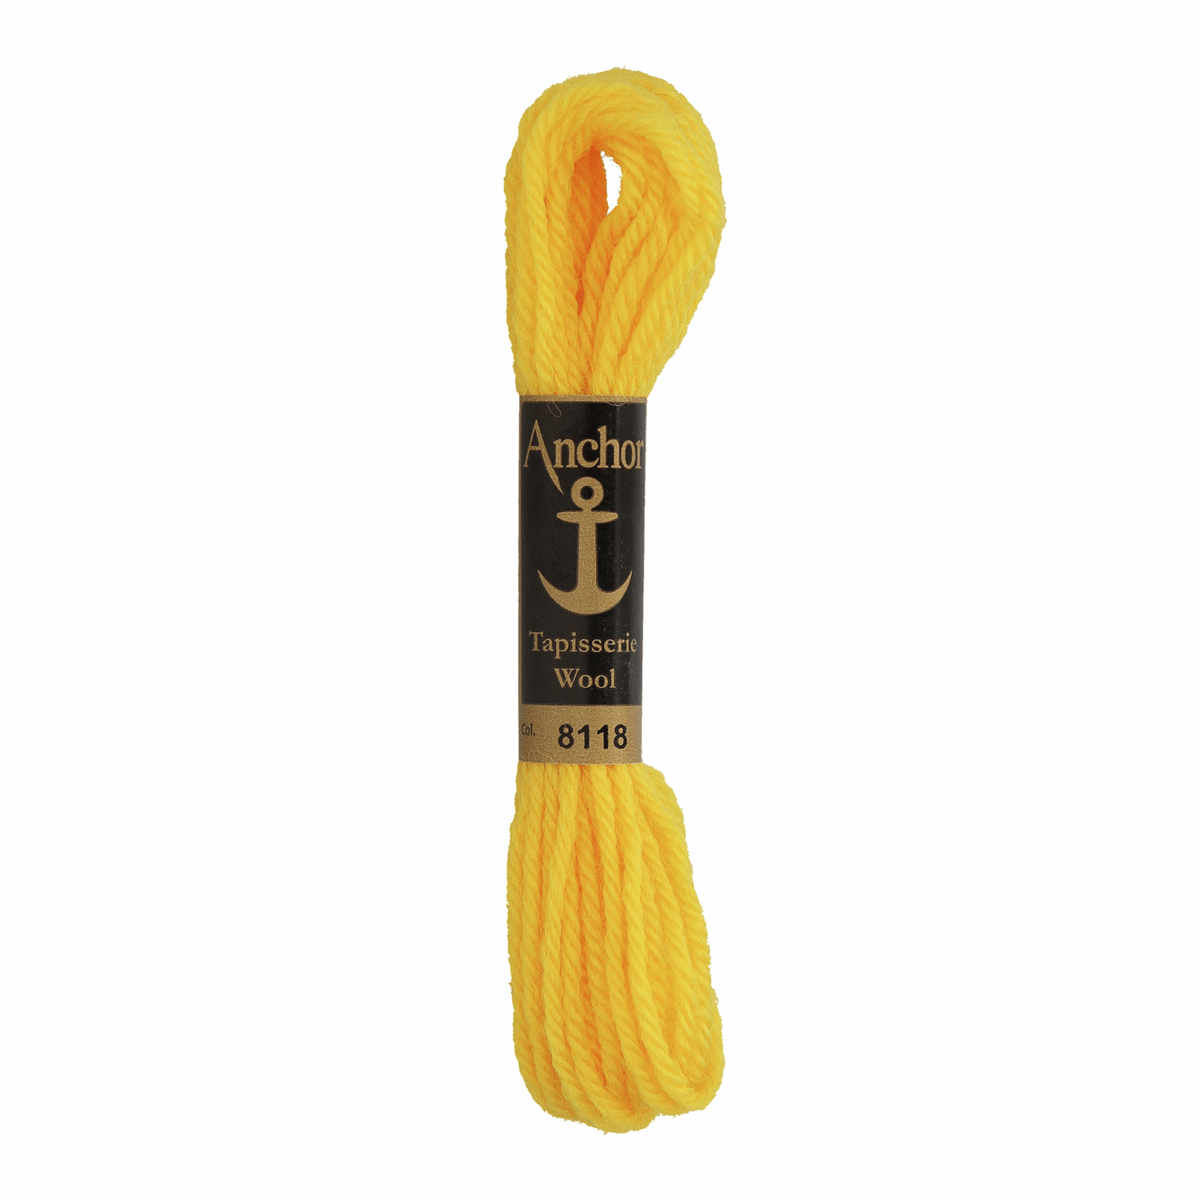 Anchor Tapestry Wool - Shade 8118 - 10m